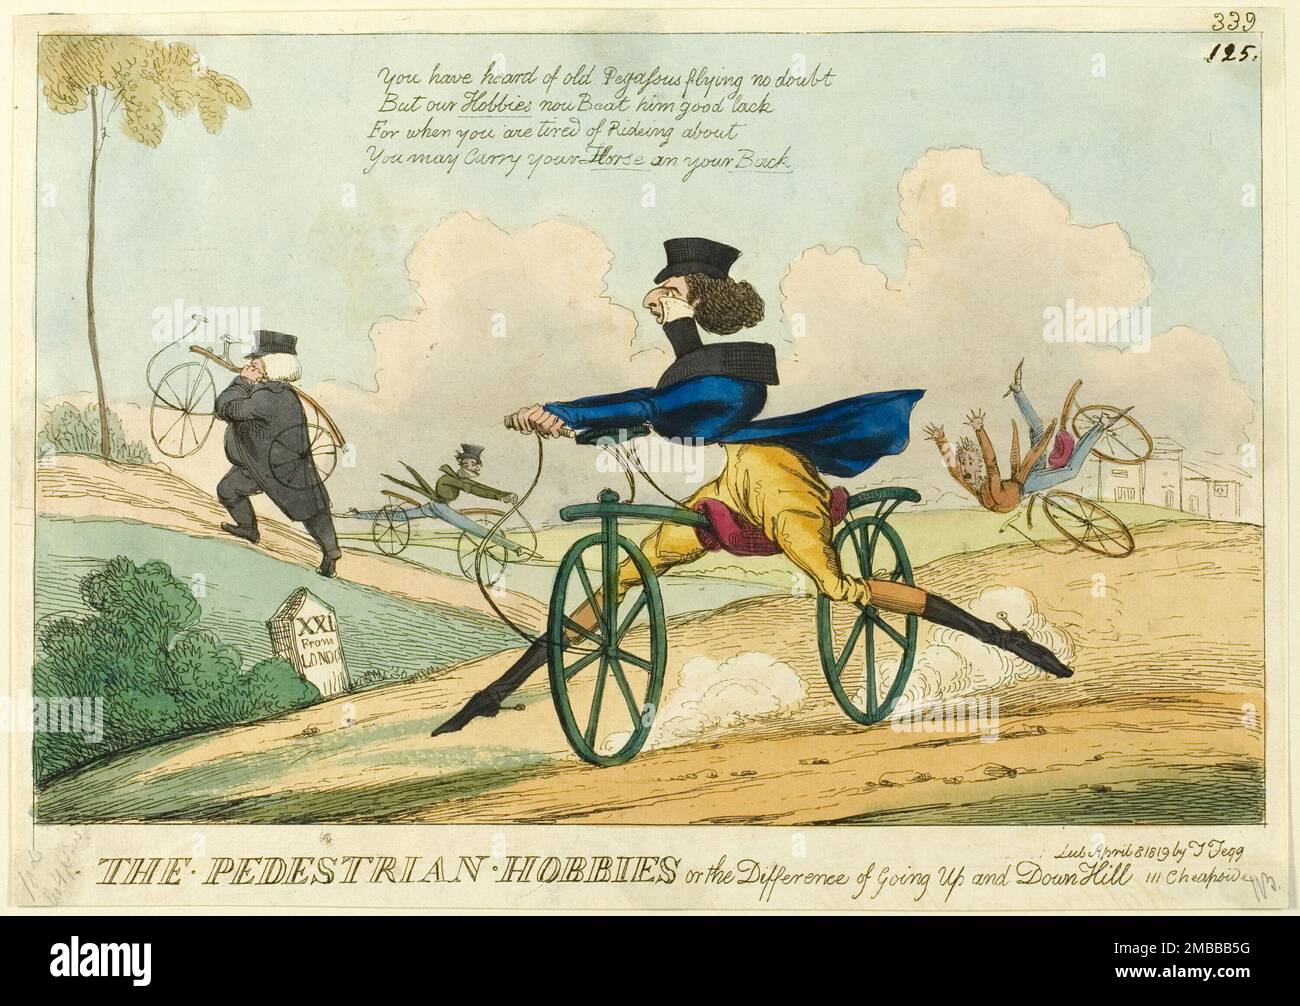 The Pedestrian Hobbies, or the Difference of Going Up and Down Hill, published April 8, 1819. Men riding hobby horses (a forerunner of the bicycle). The lack of gears and brakes meant they had to be carried uphill, and were dangerous going downhill. 'You have heard of old Pegassus flying no doubt, But our hobbies now Beat him good lack, For when you are tired of Rideing about, You may Carry your Horse on your Back'. Attributed to William Heath. Stock Photo